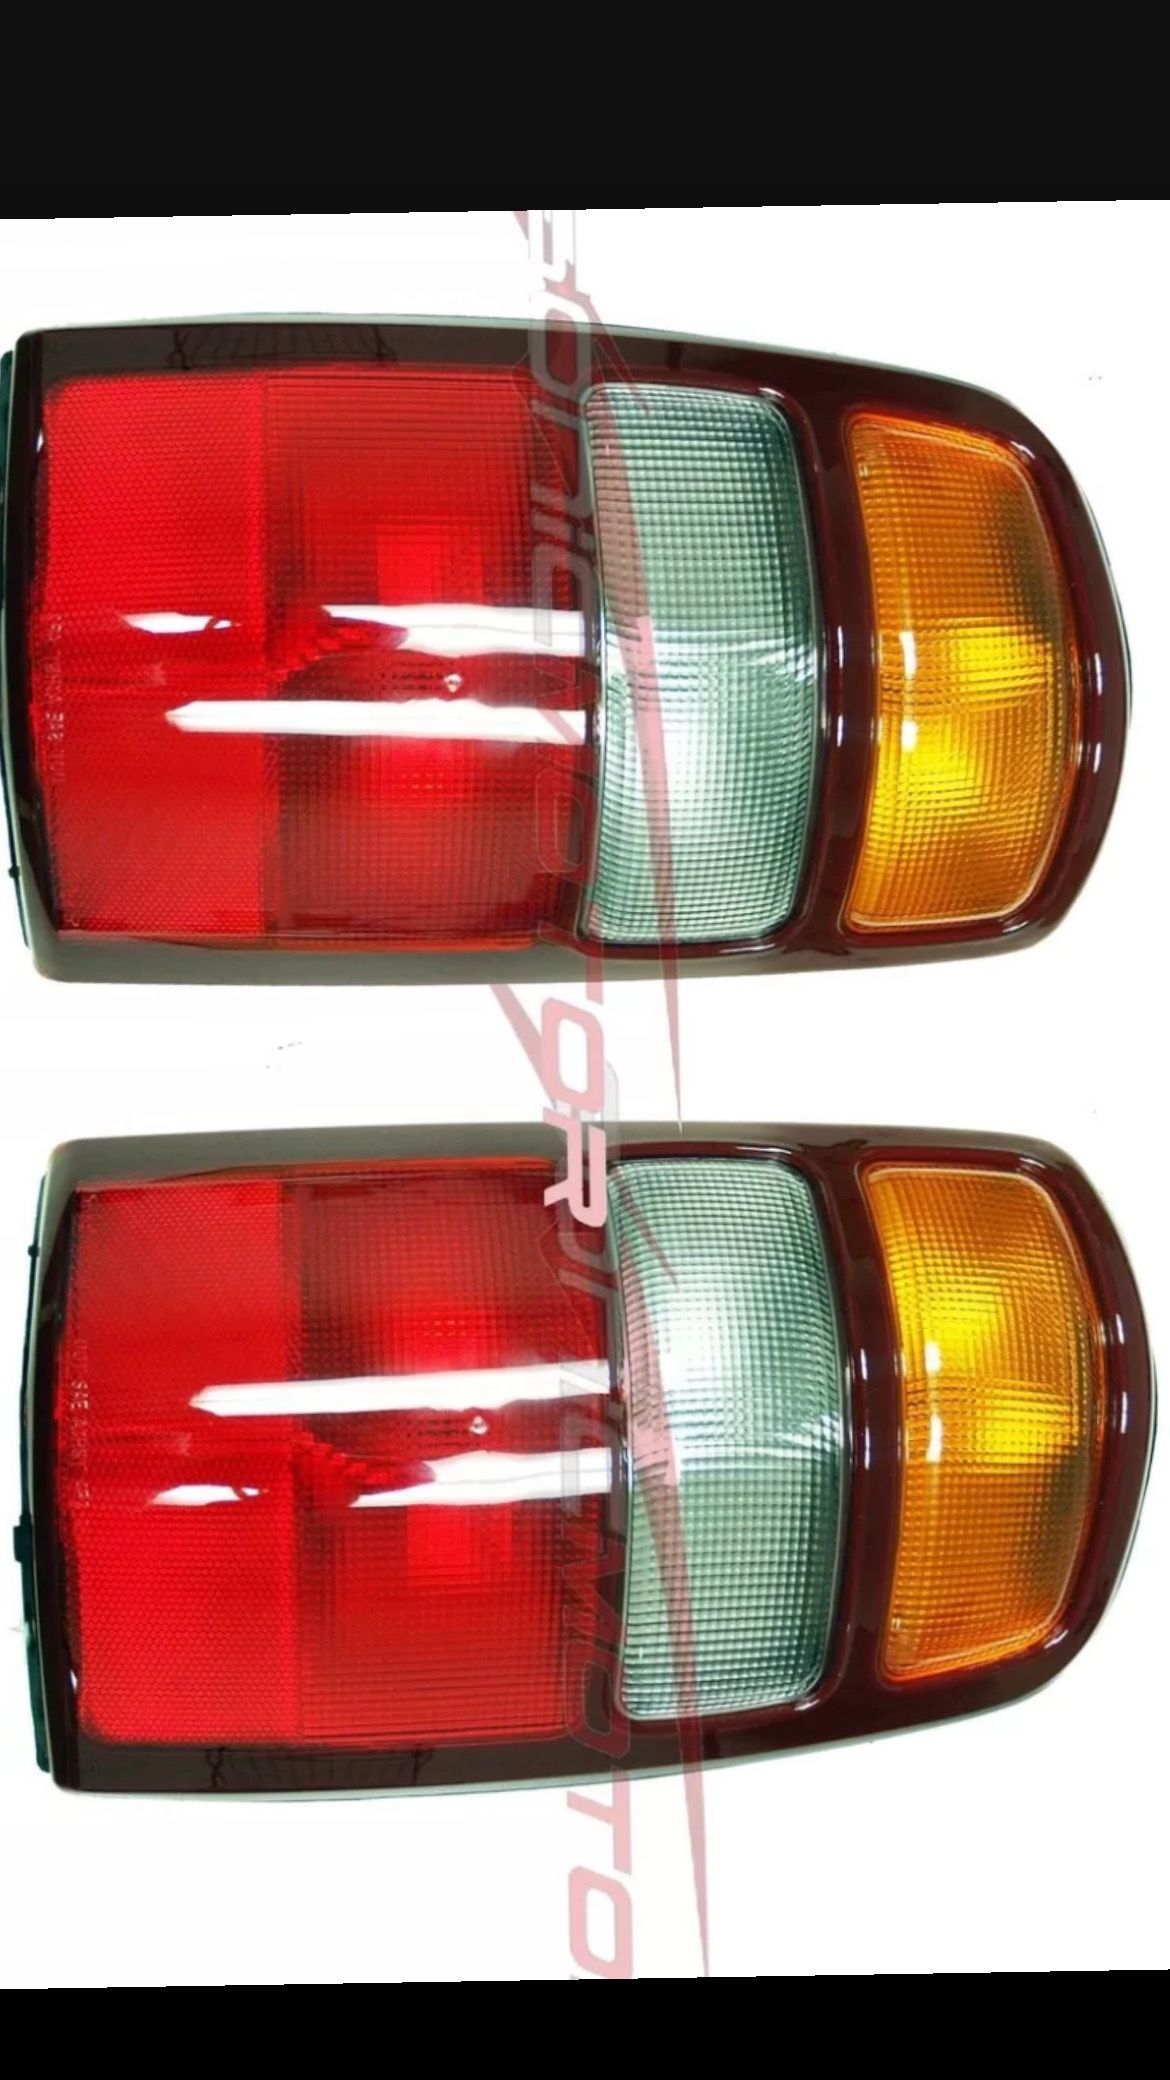 Gmc Yukon Tail Lights Fit Silverado Single Cab  Crew  Cab Fits Most Tahoes 2000-2004  And {Newly Used}